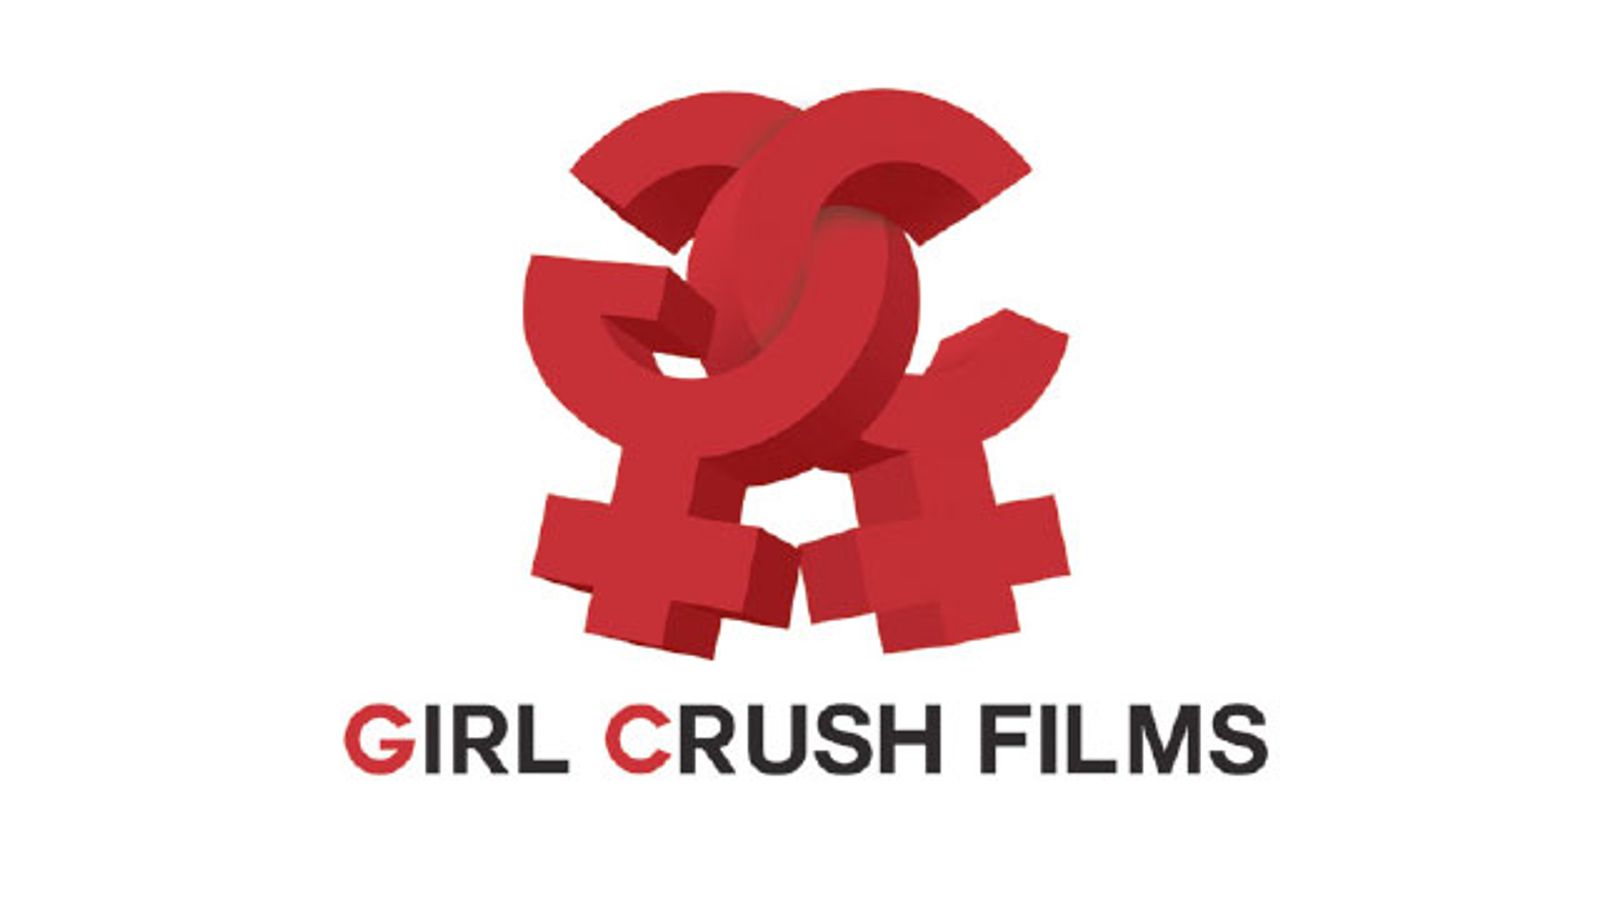 New All-Girl Studio Girl Crush Films to Bow This Spring